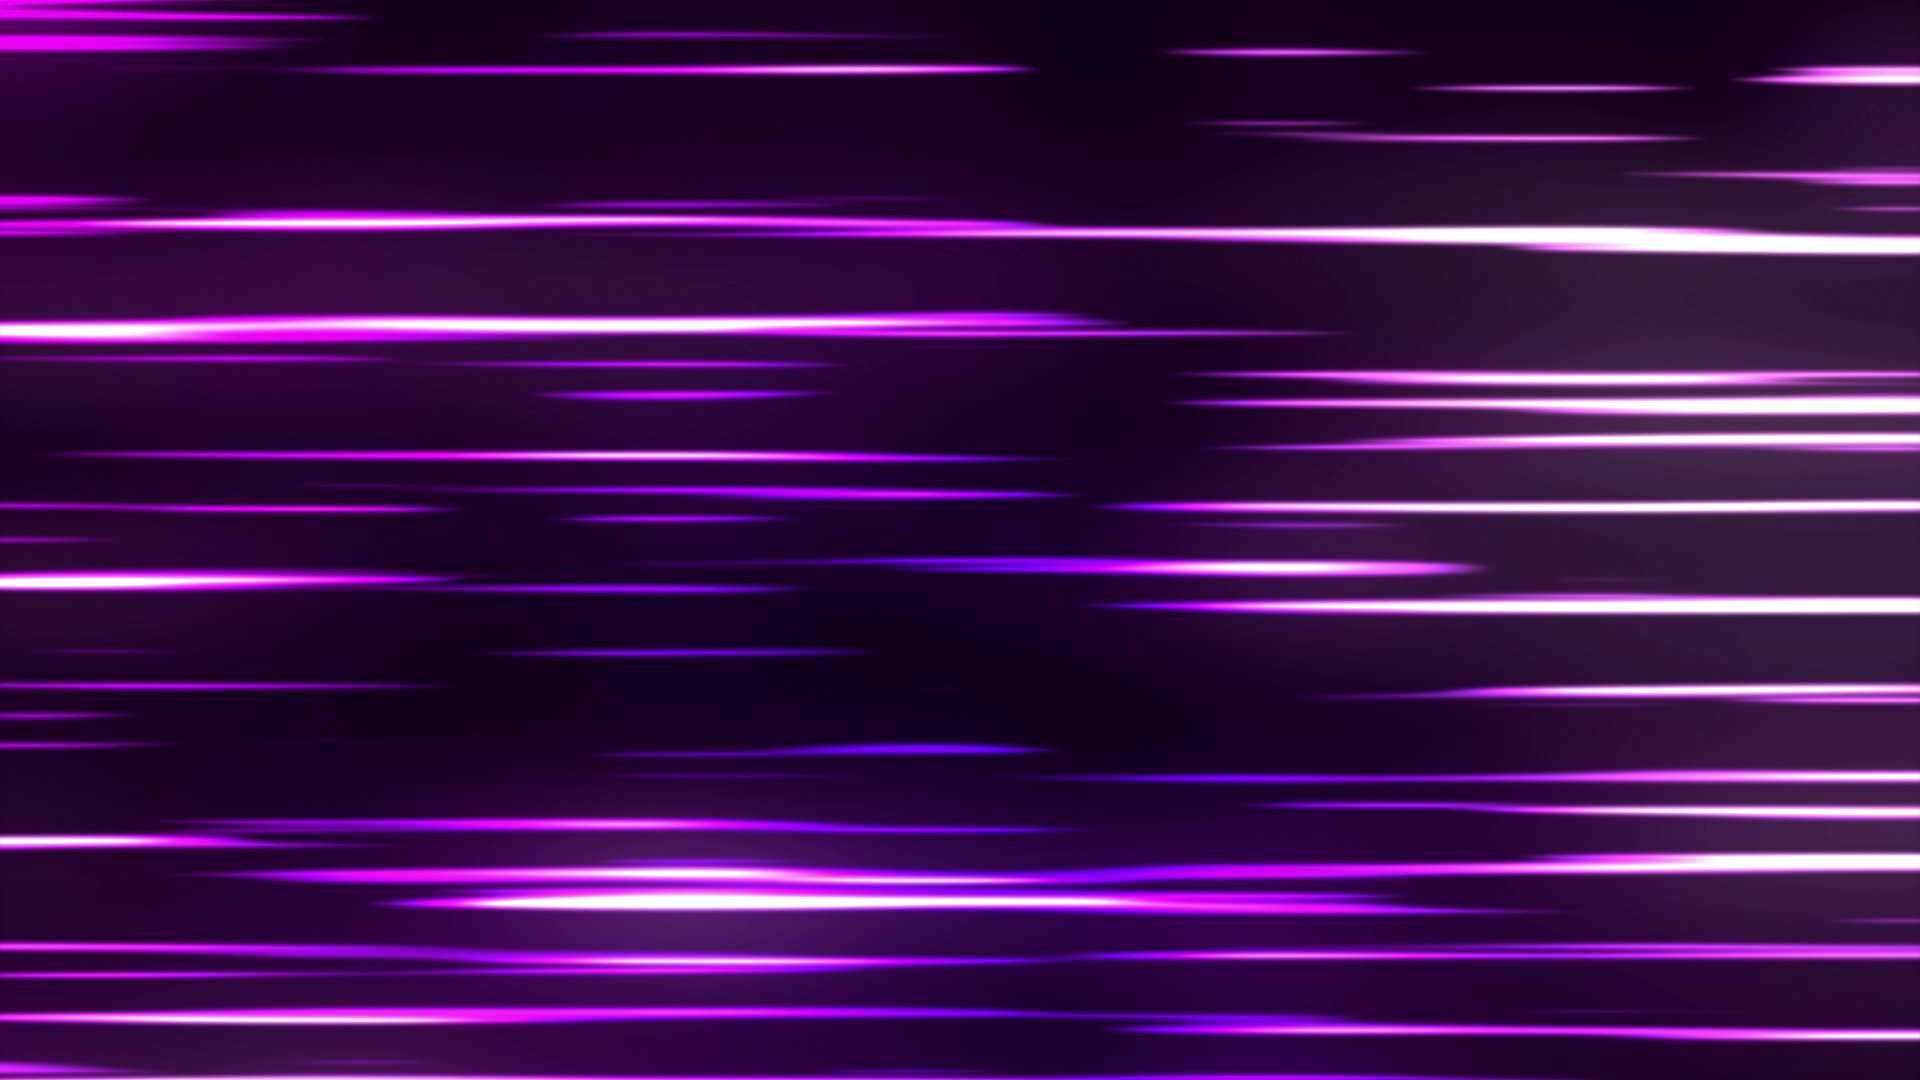 4K Glowing Purple Screensaver Looped || Free To Use UHD Motion Background || FREE DOWNLOAD